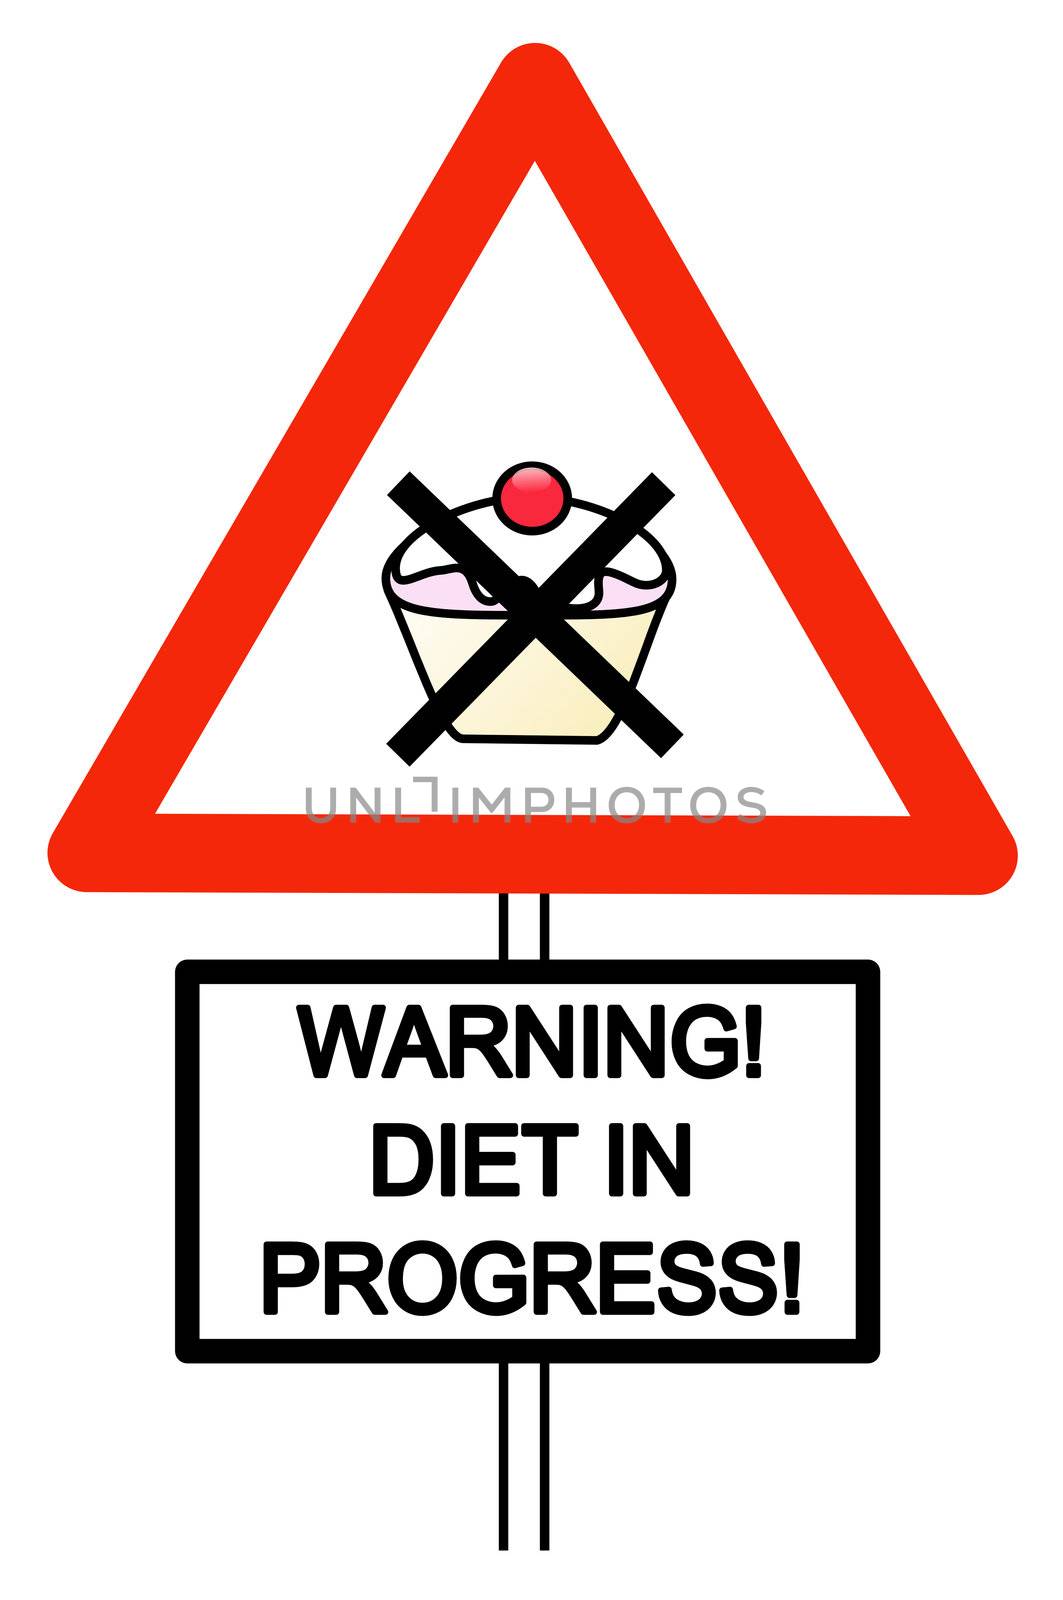 Illustration of a red triangular warning sign with image of crossed cake and square sign with the words 'DIET IN PROGRESS'